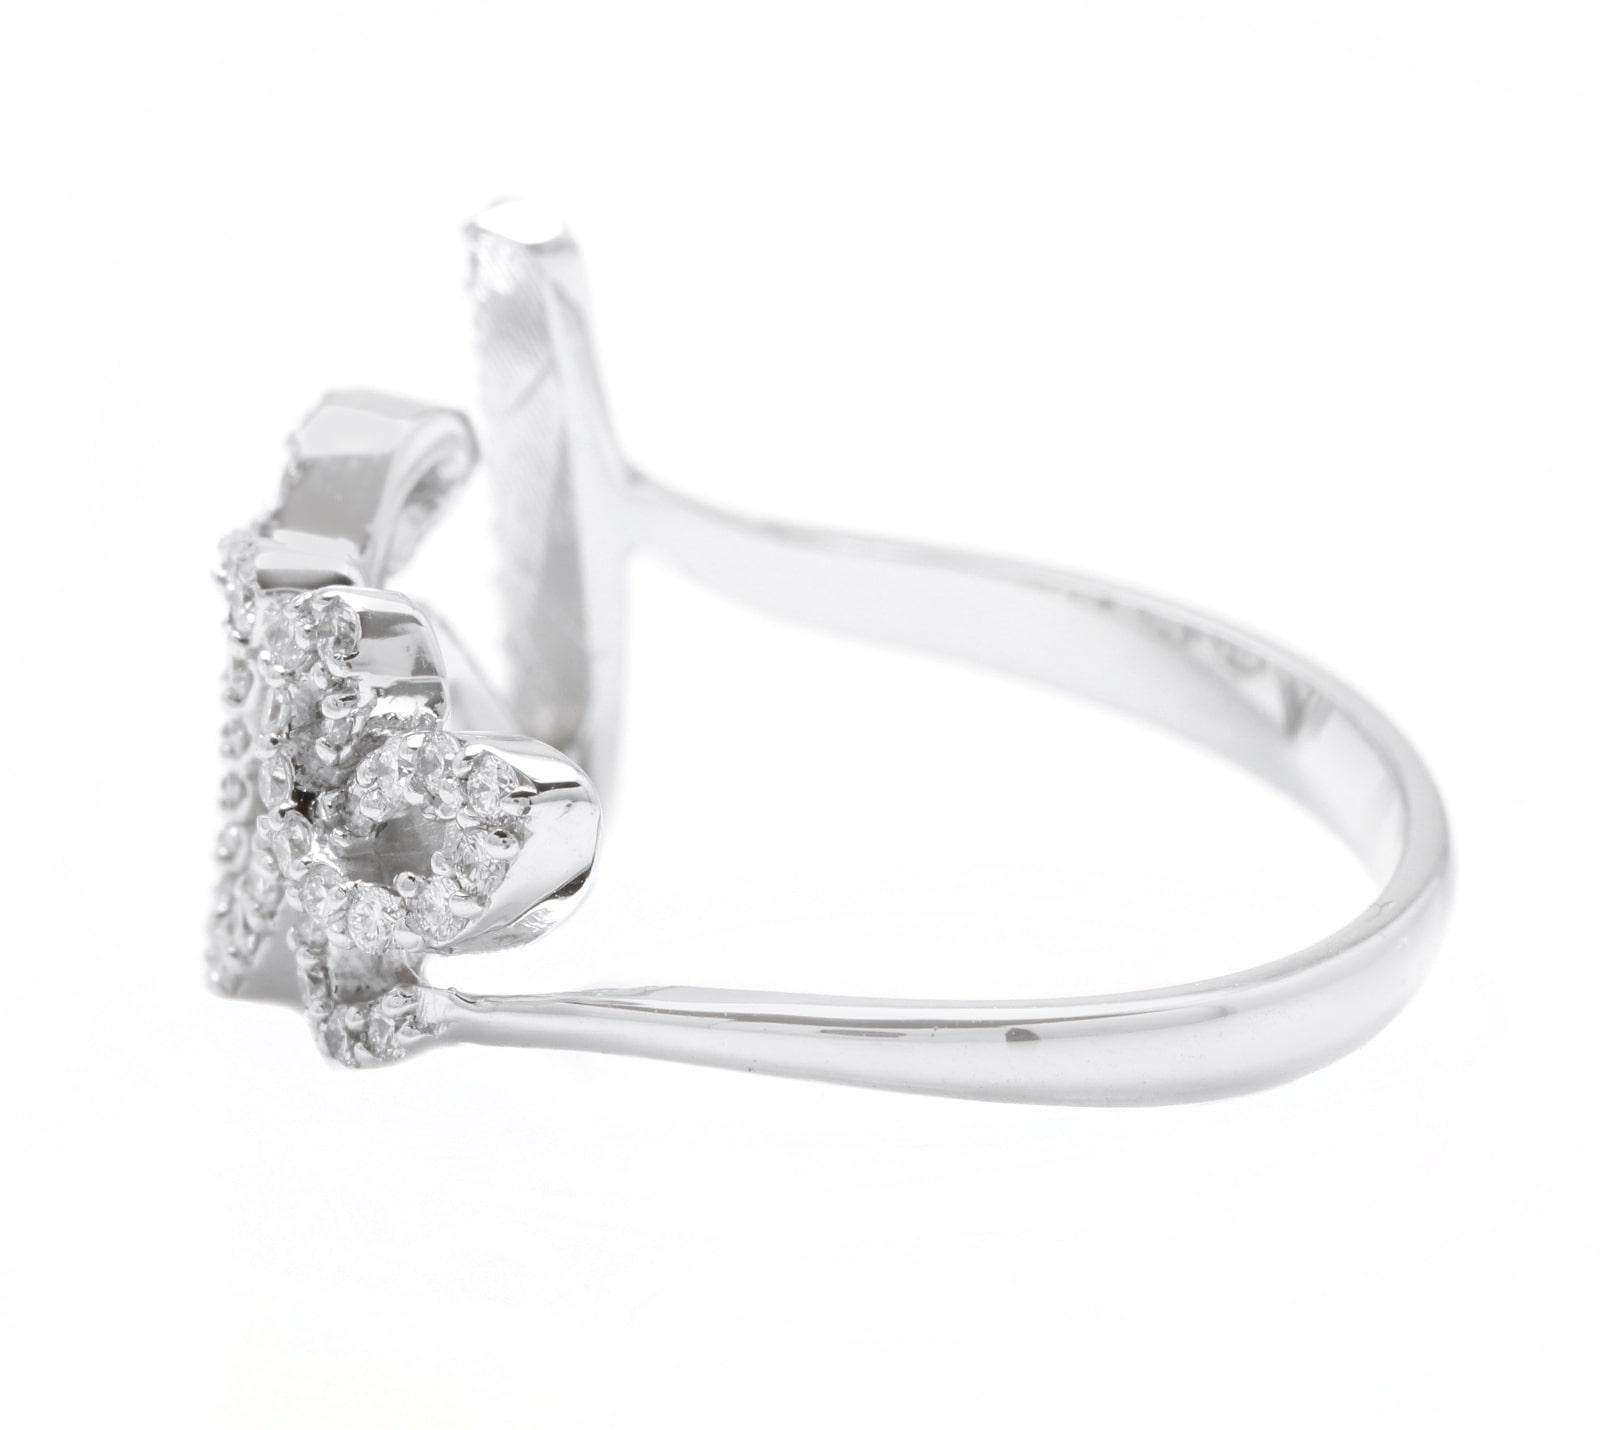 Cute 0.45 Carats Natural Diamond 14K Solid White Gold LOVE Ring

Suggested Replacement Value: Approx. $2,000.00

Stamped: 14K

Total Natural Round Cut Diamonds Weight: Approx. 0.45 Carats (color G-H / Clarity SI1-SI2)

The width of the ring is: